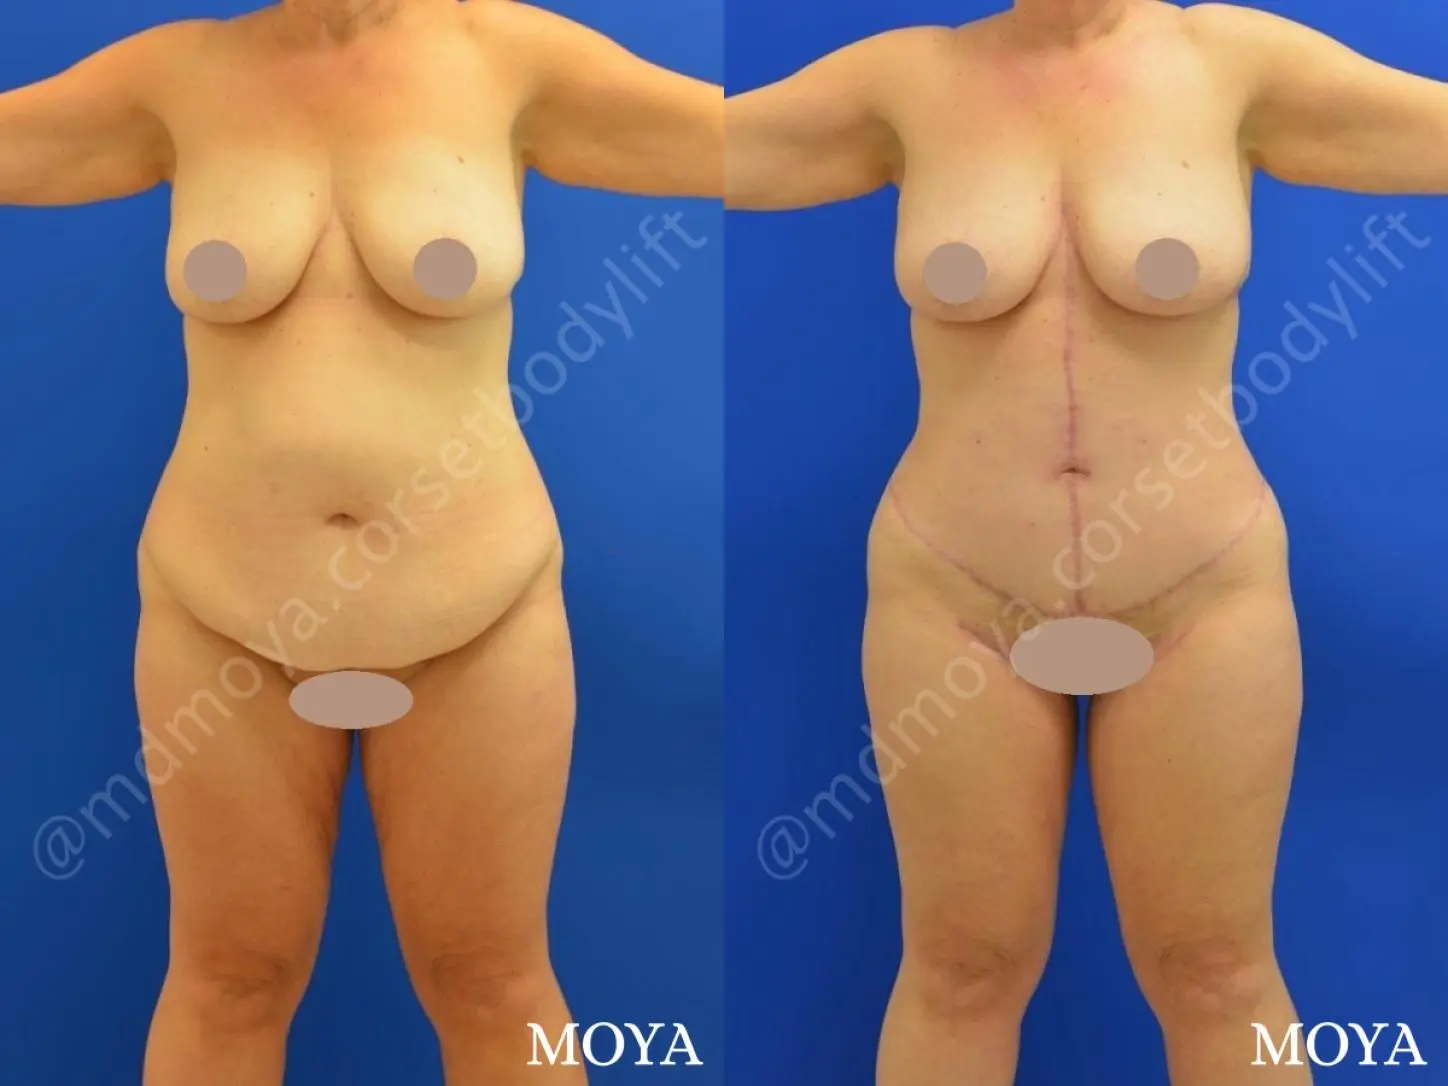 Fleur-de-lis Tummy Tuck (std):  BMI 29 - Before and After  